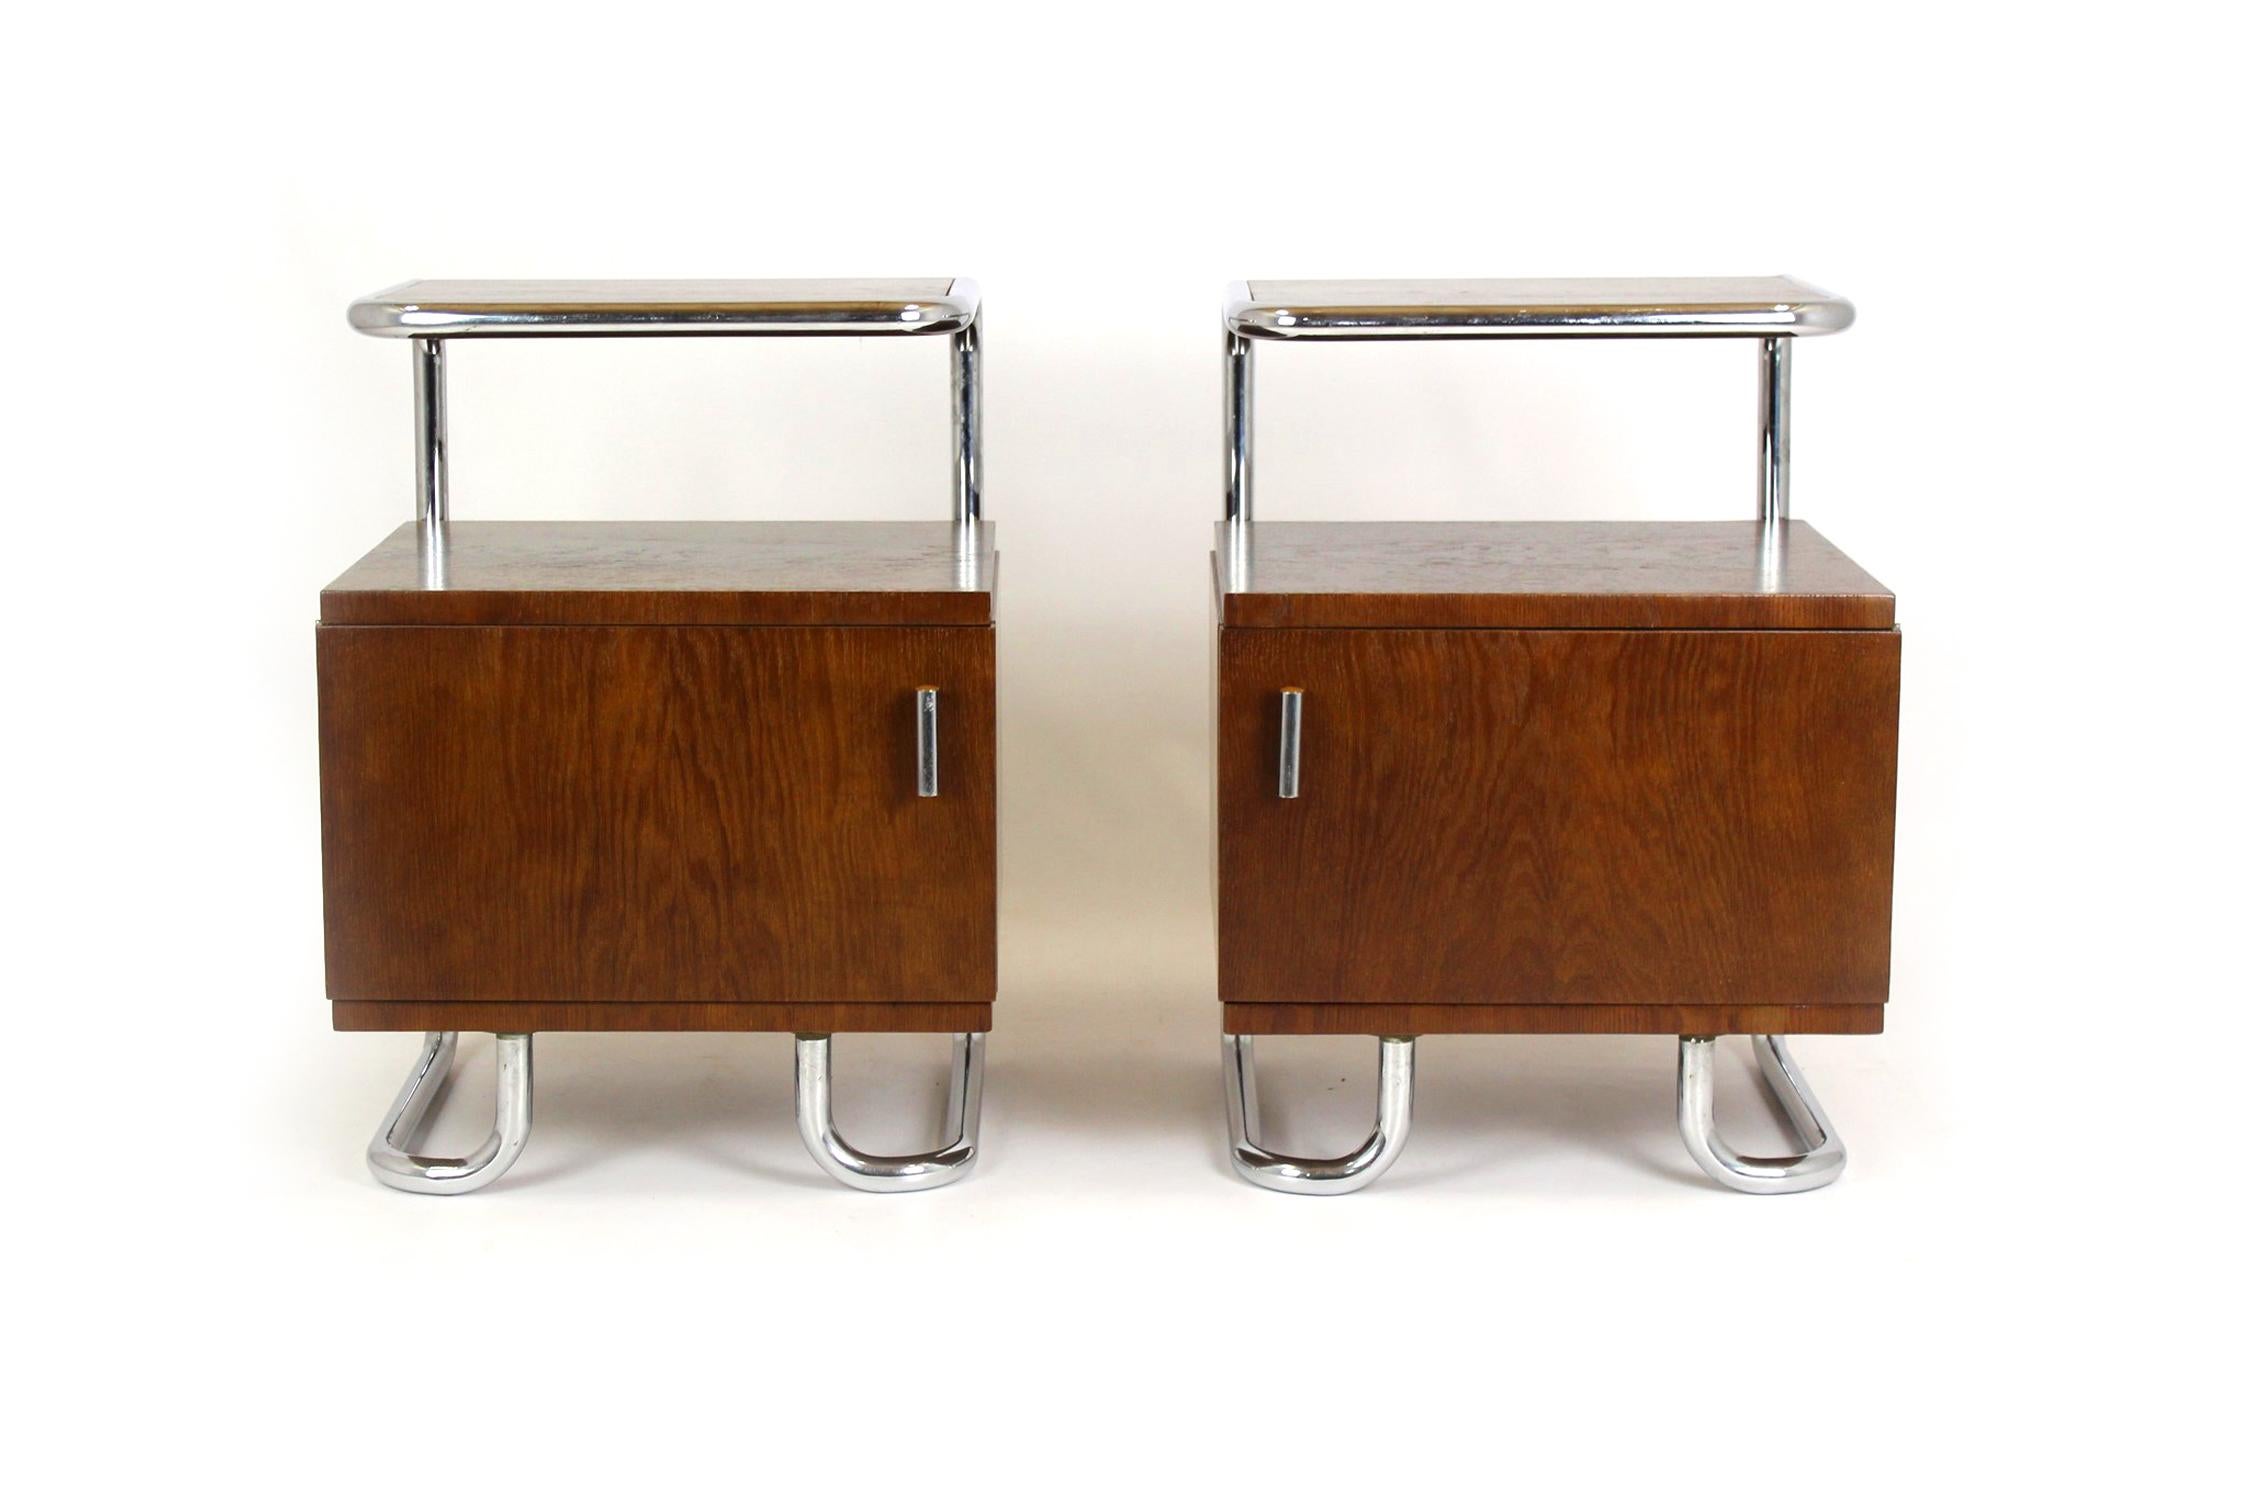 
This set of two Bauhaus style bedside tables was produced in the 1930's by Hynek Gottwald. They are made of oak and a chrome tubular steel frame.
The bedside tables have been restored, varnished in a satin finish. The chrome plating is preserved in